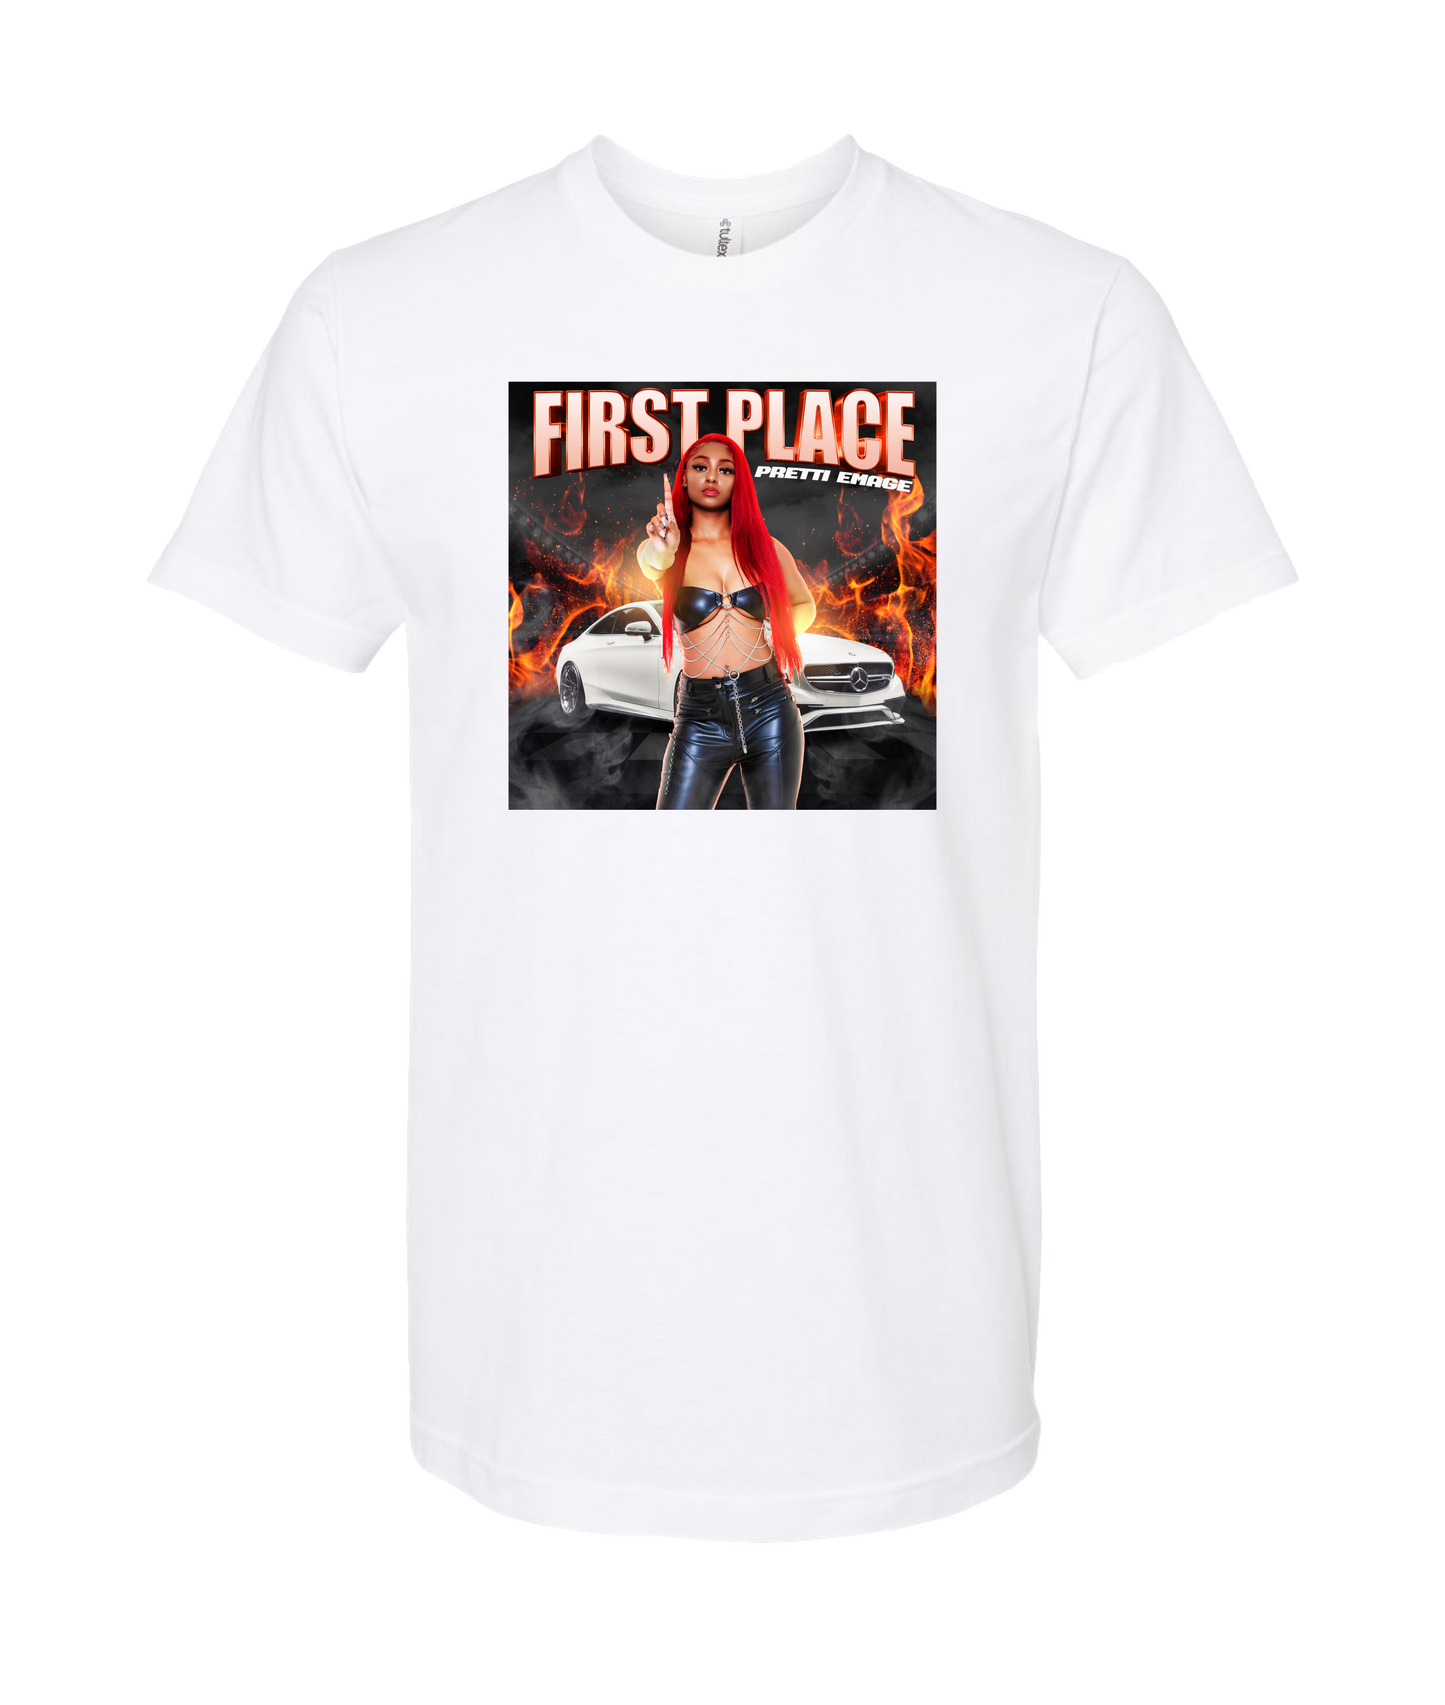 Pretti Emage - First Place - White T Shirt